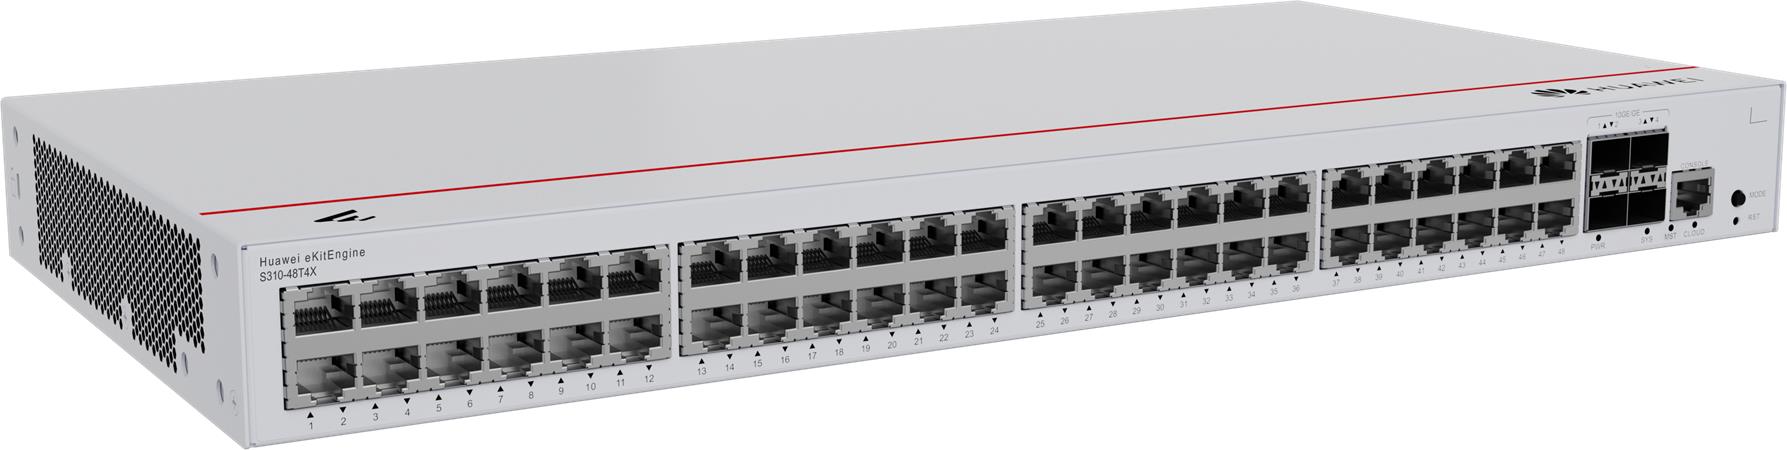 Huawei S310-48T4XS witch (48*10/100/1000BASE-T ports, 4*10GE SFP+ ports, built-i